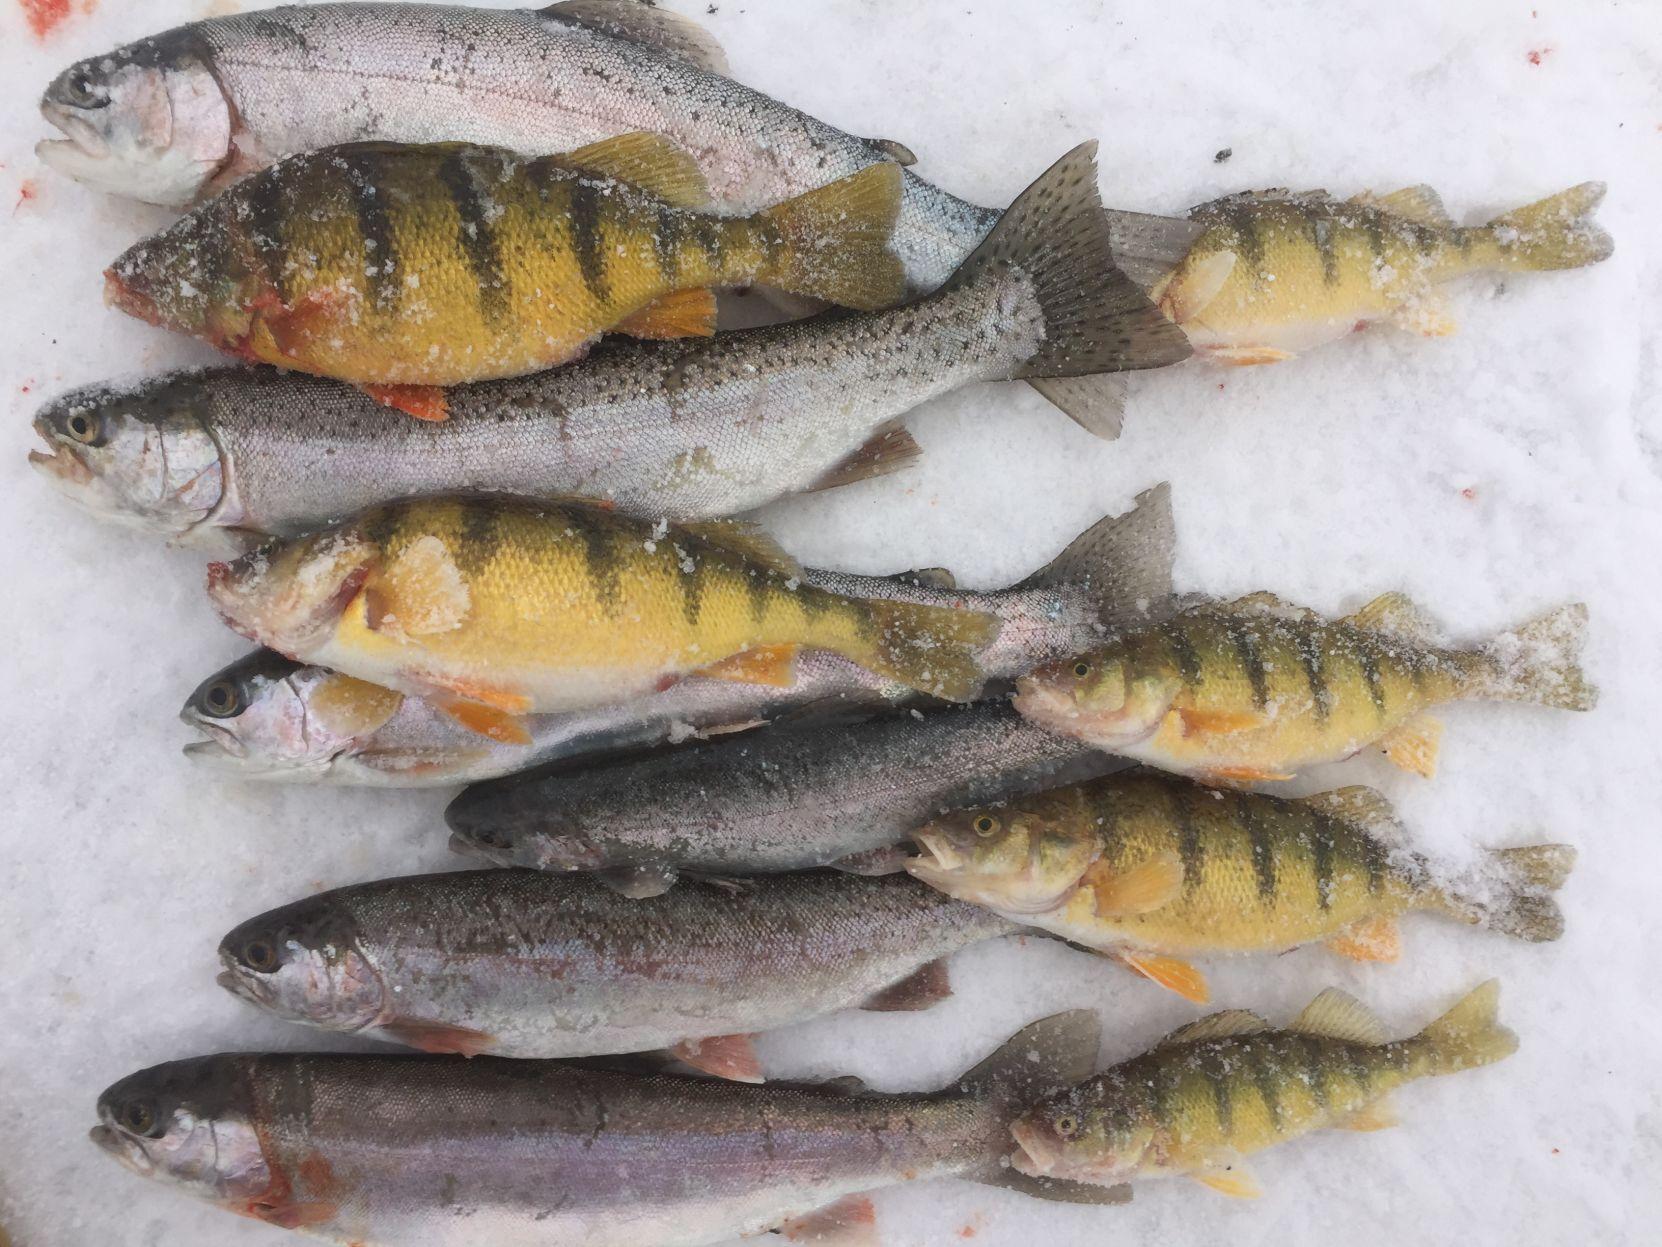 With ice fishing season here, some tips and strategies